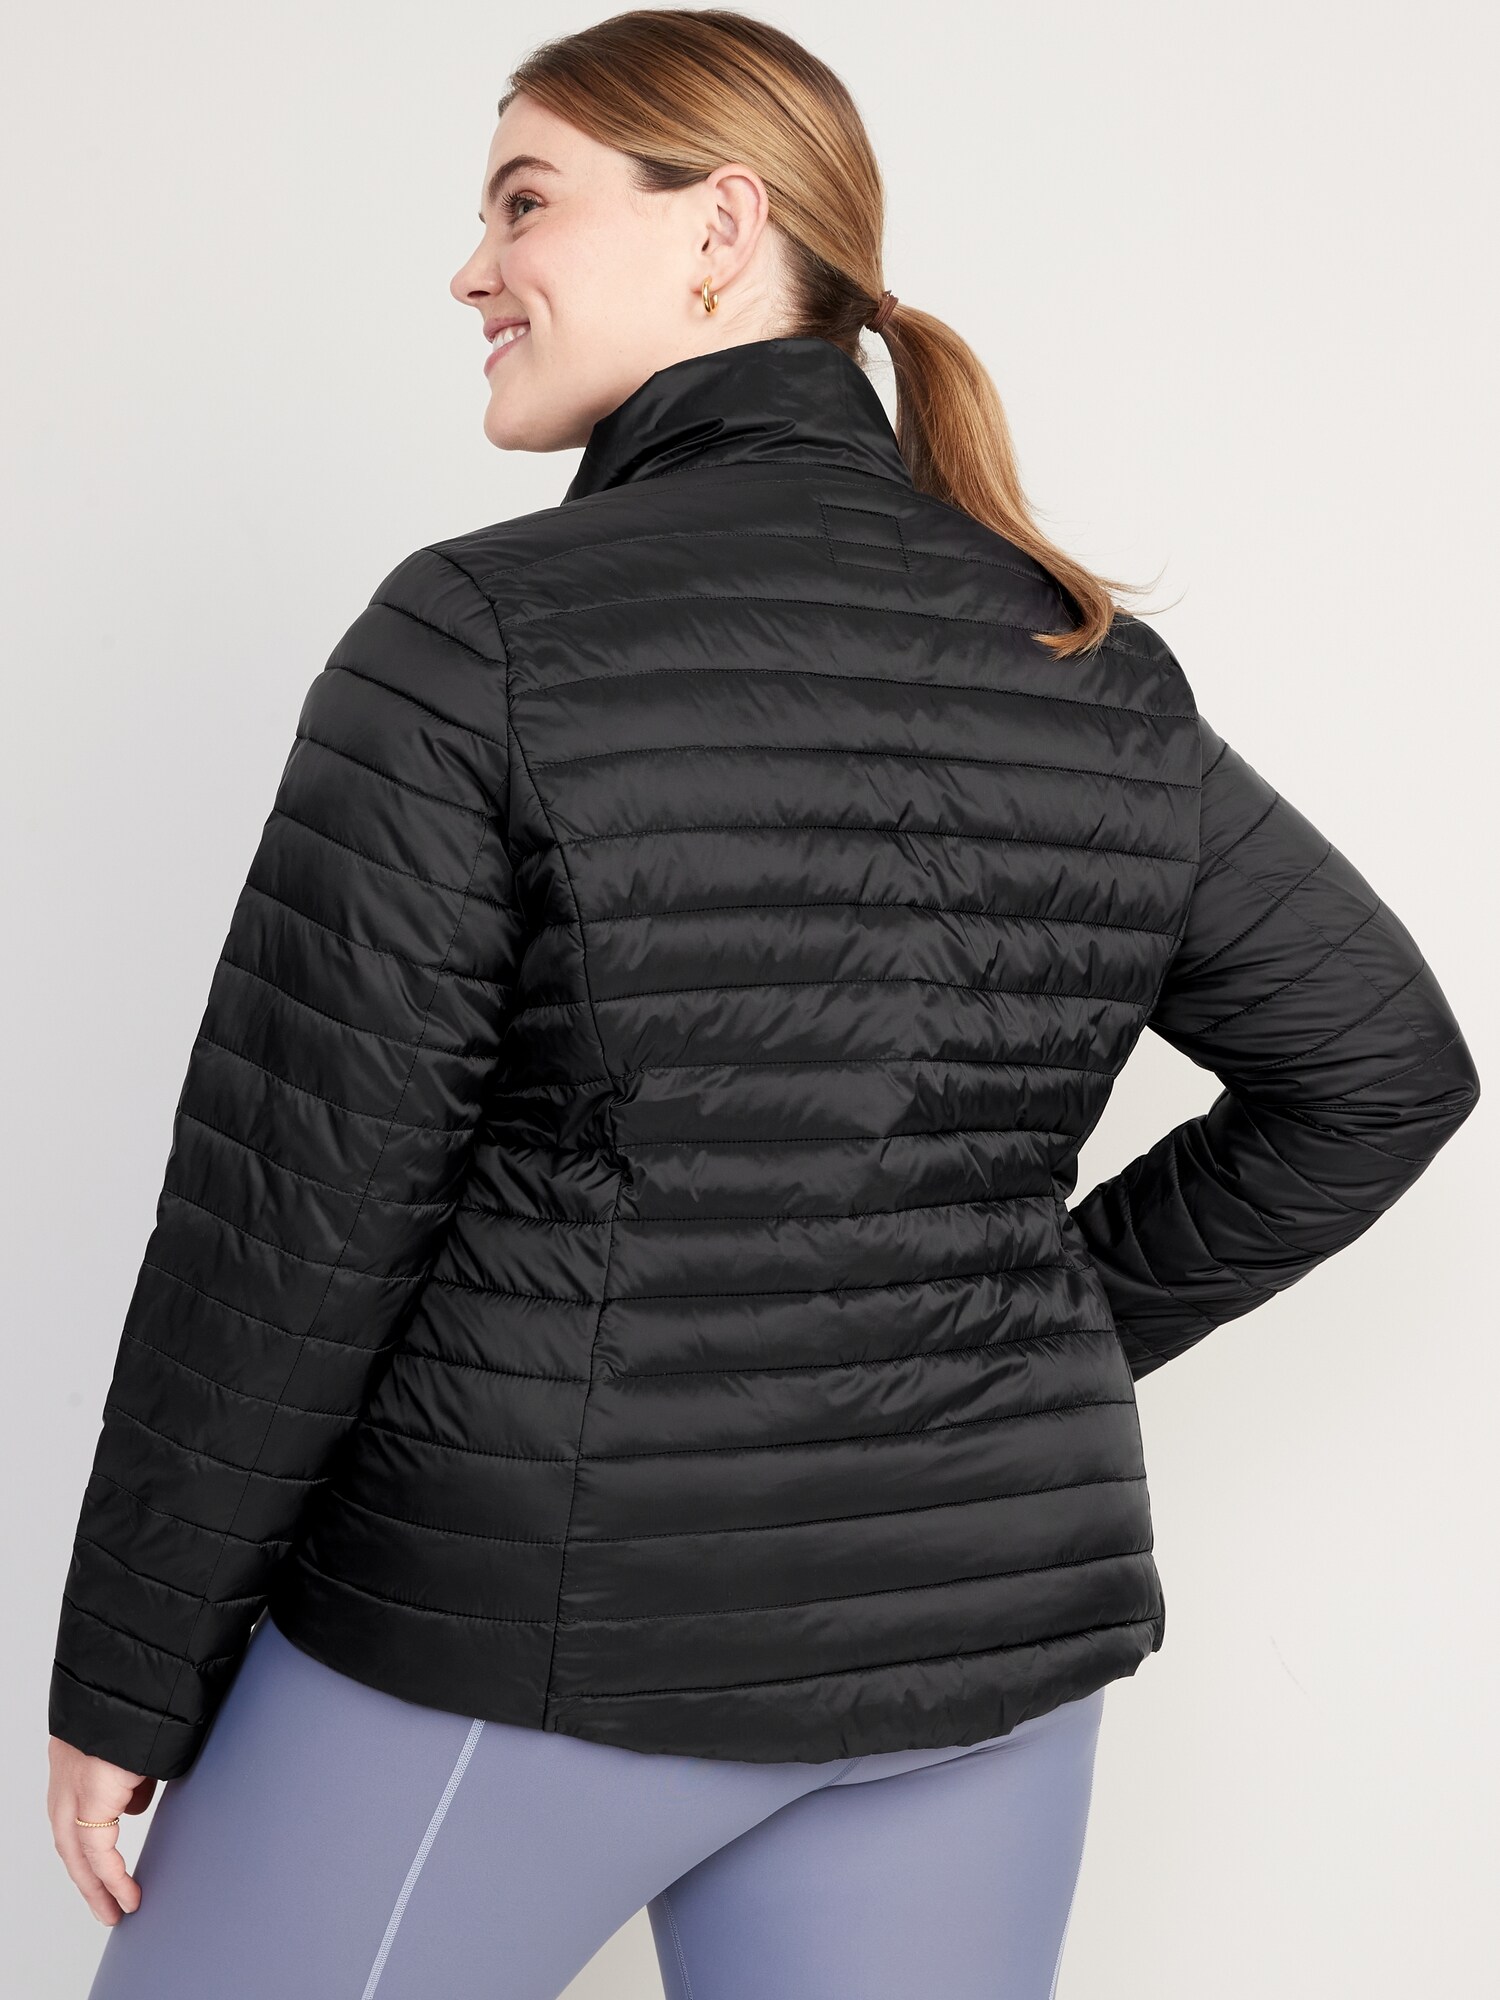 Packable Puffer Jacket for Tall Women in Black